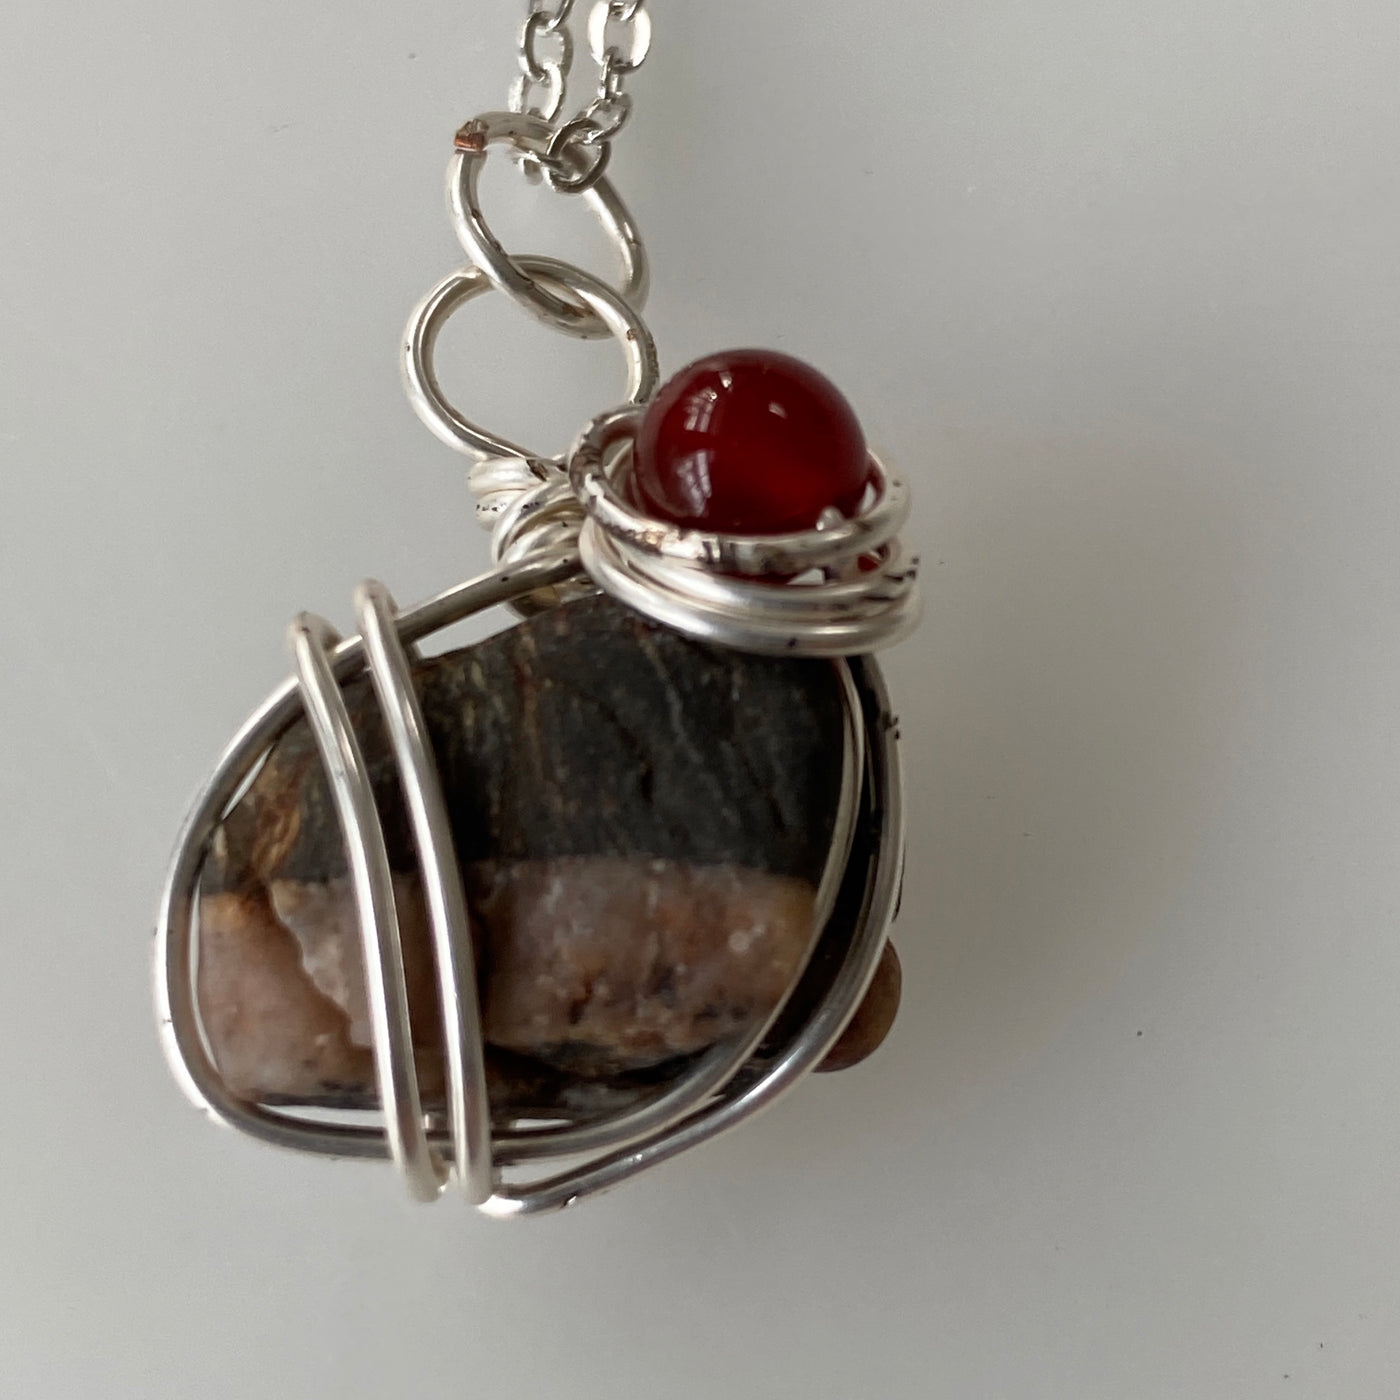 Small beautiful white and black natural stone pendant with red natural stone and silver wire